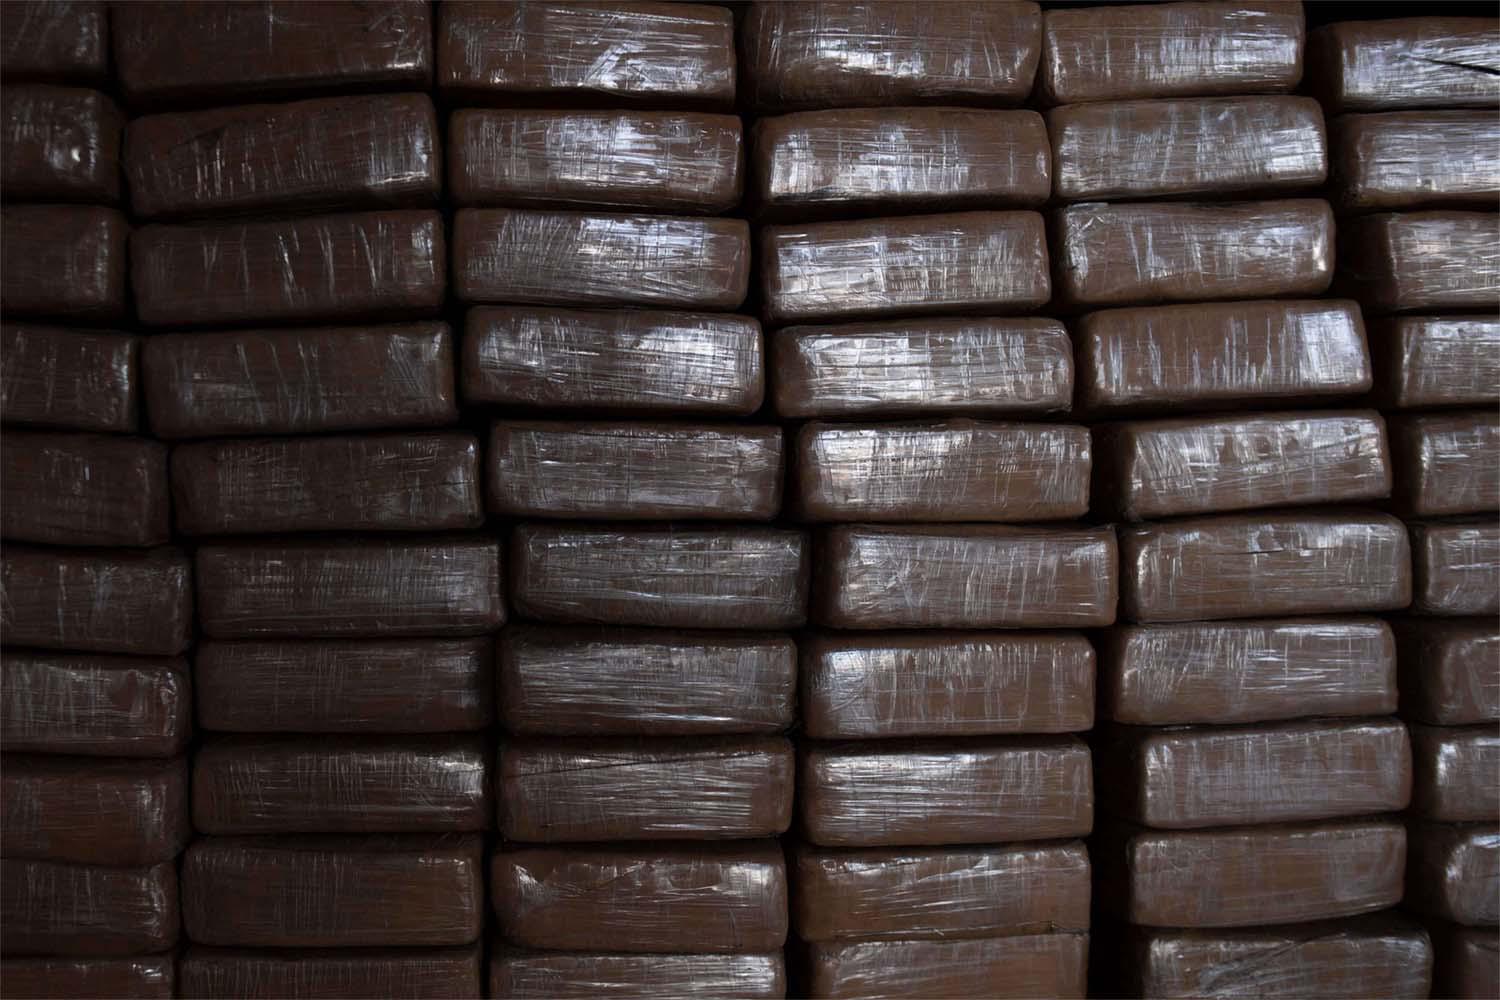 The 64 packages of cocaine and the detainees were then taken to the port of La Luz, in Las Palmas 